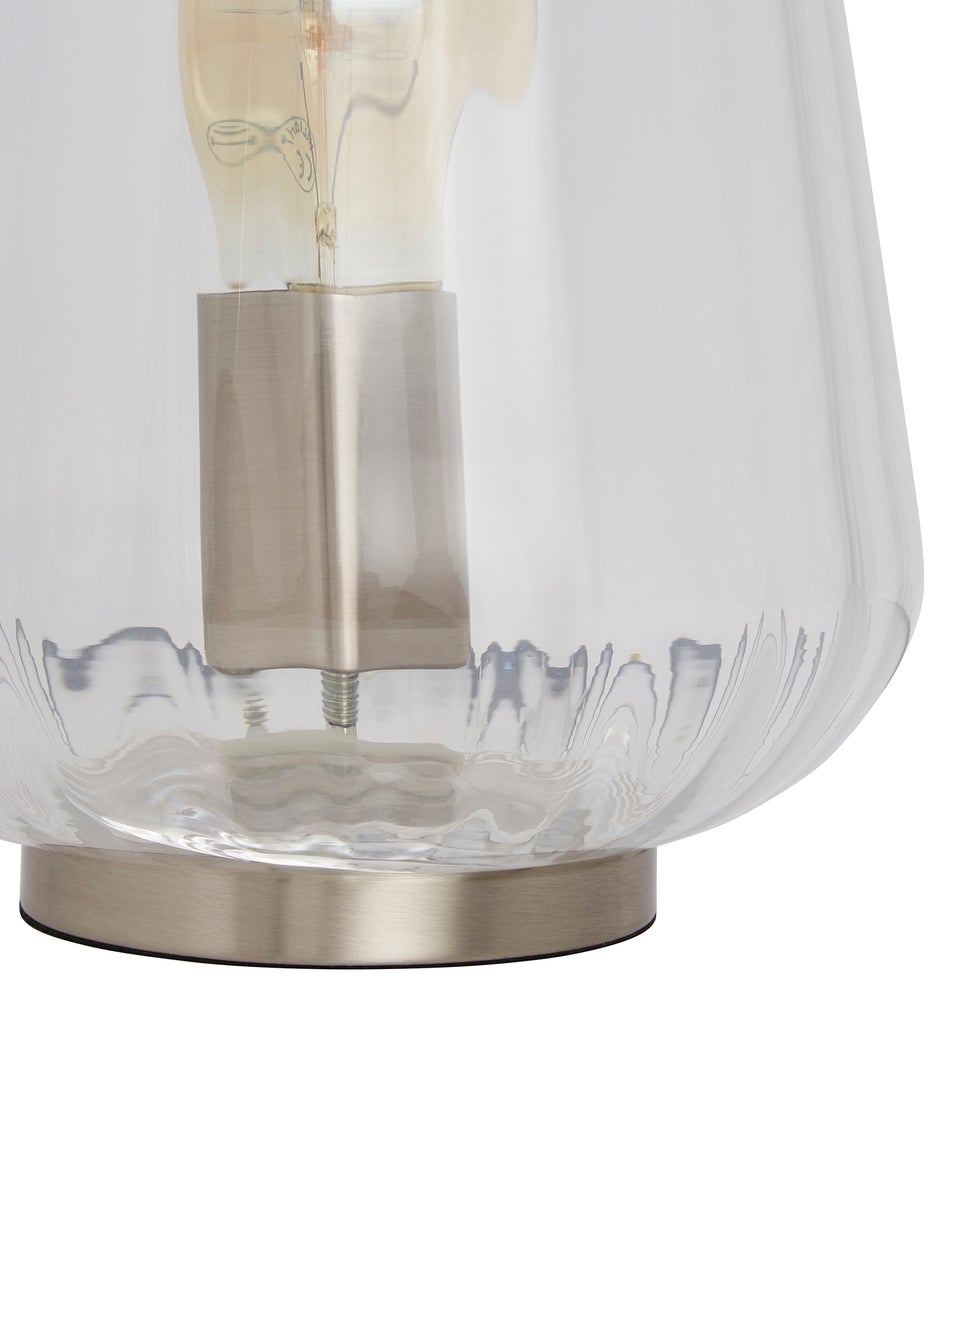 Inlight Clear Glass Table Lamp